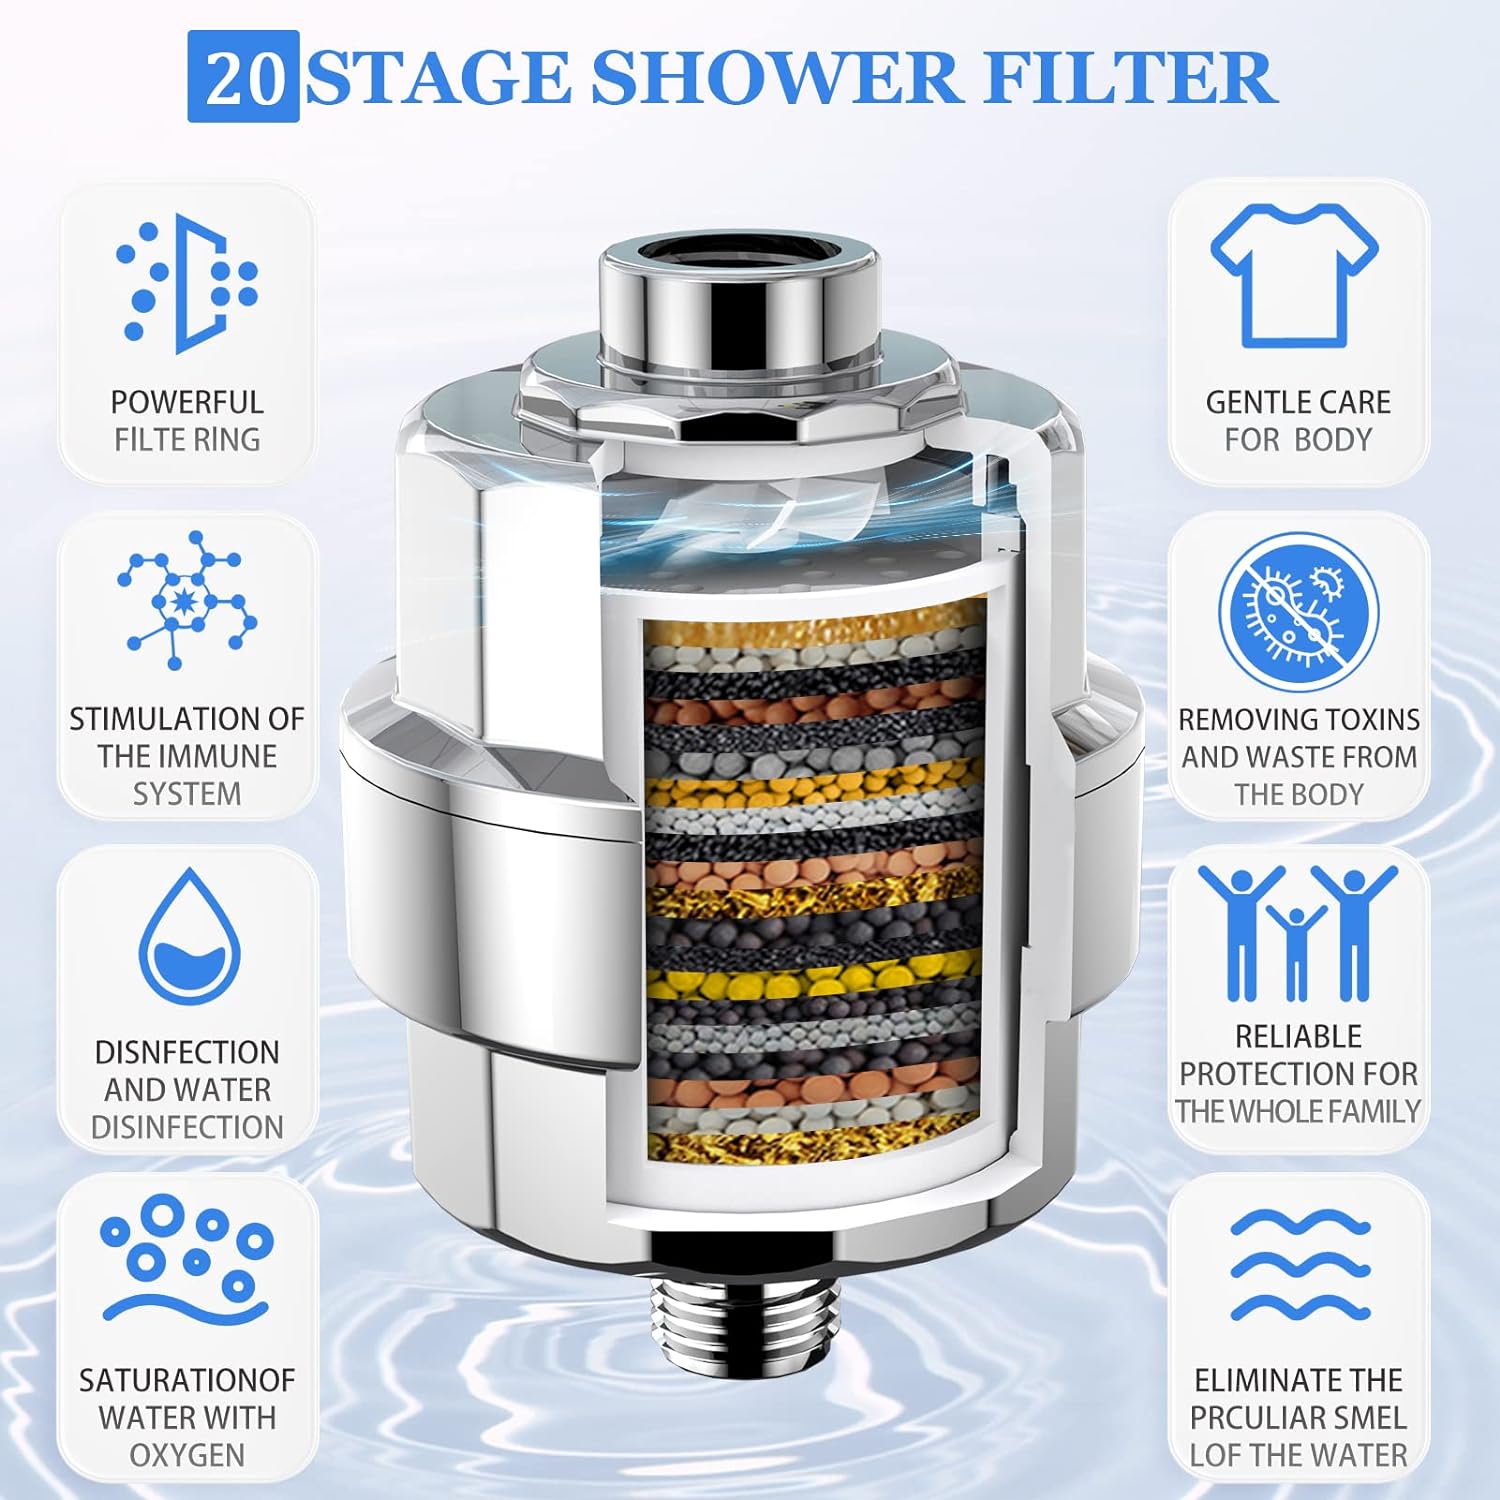 SR SUN RISE Shower Head Filter for Hard Water- 20 Stage Shower Filter with Vortex -Newest Version - High Output Water Softener to Remove Chlorine and Fluoride - Soft Water Filtered with Vitamin C E